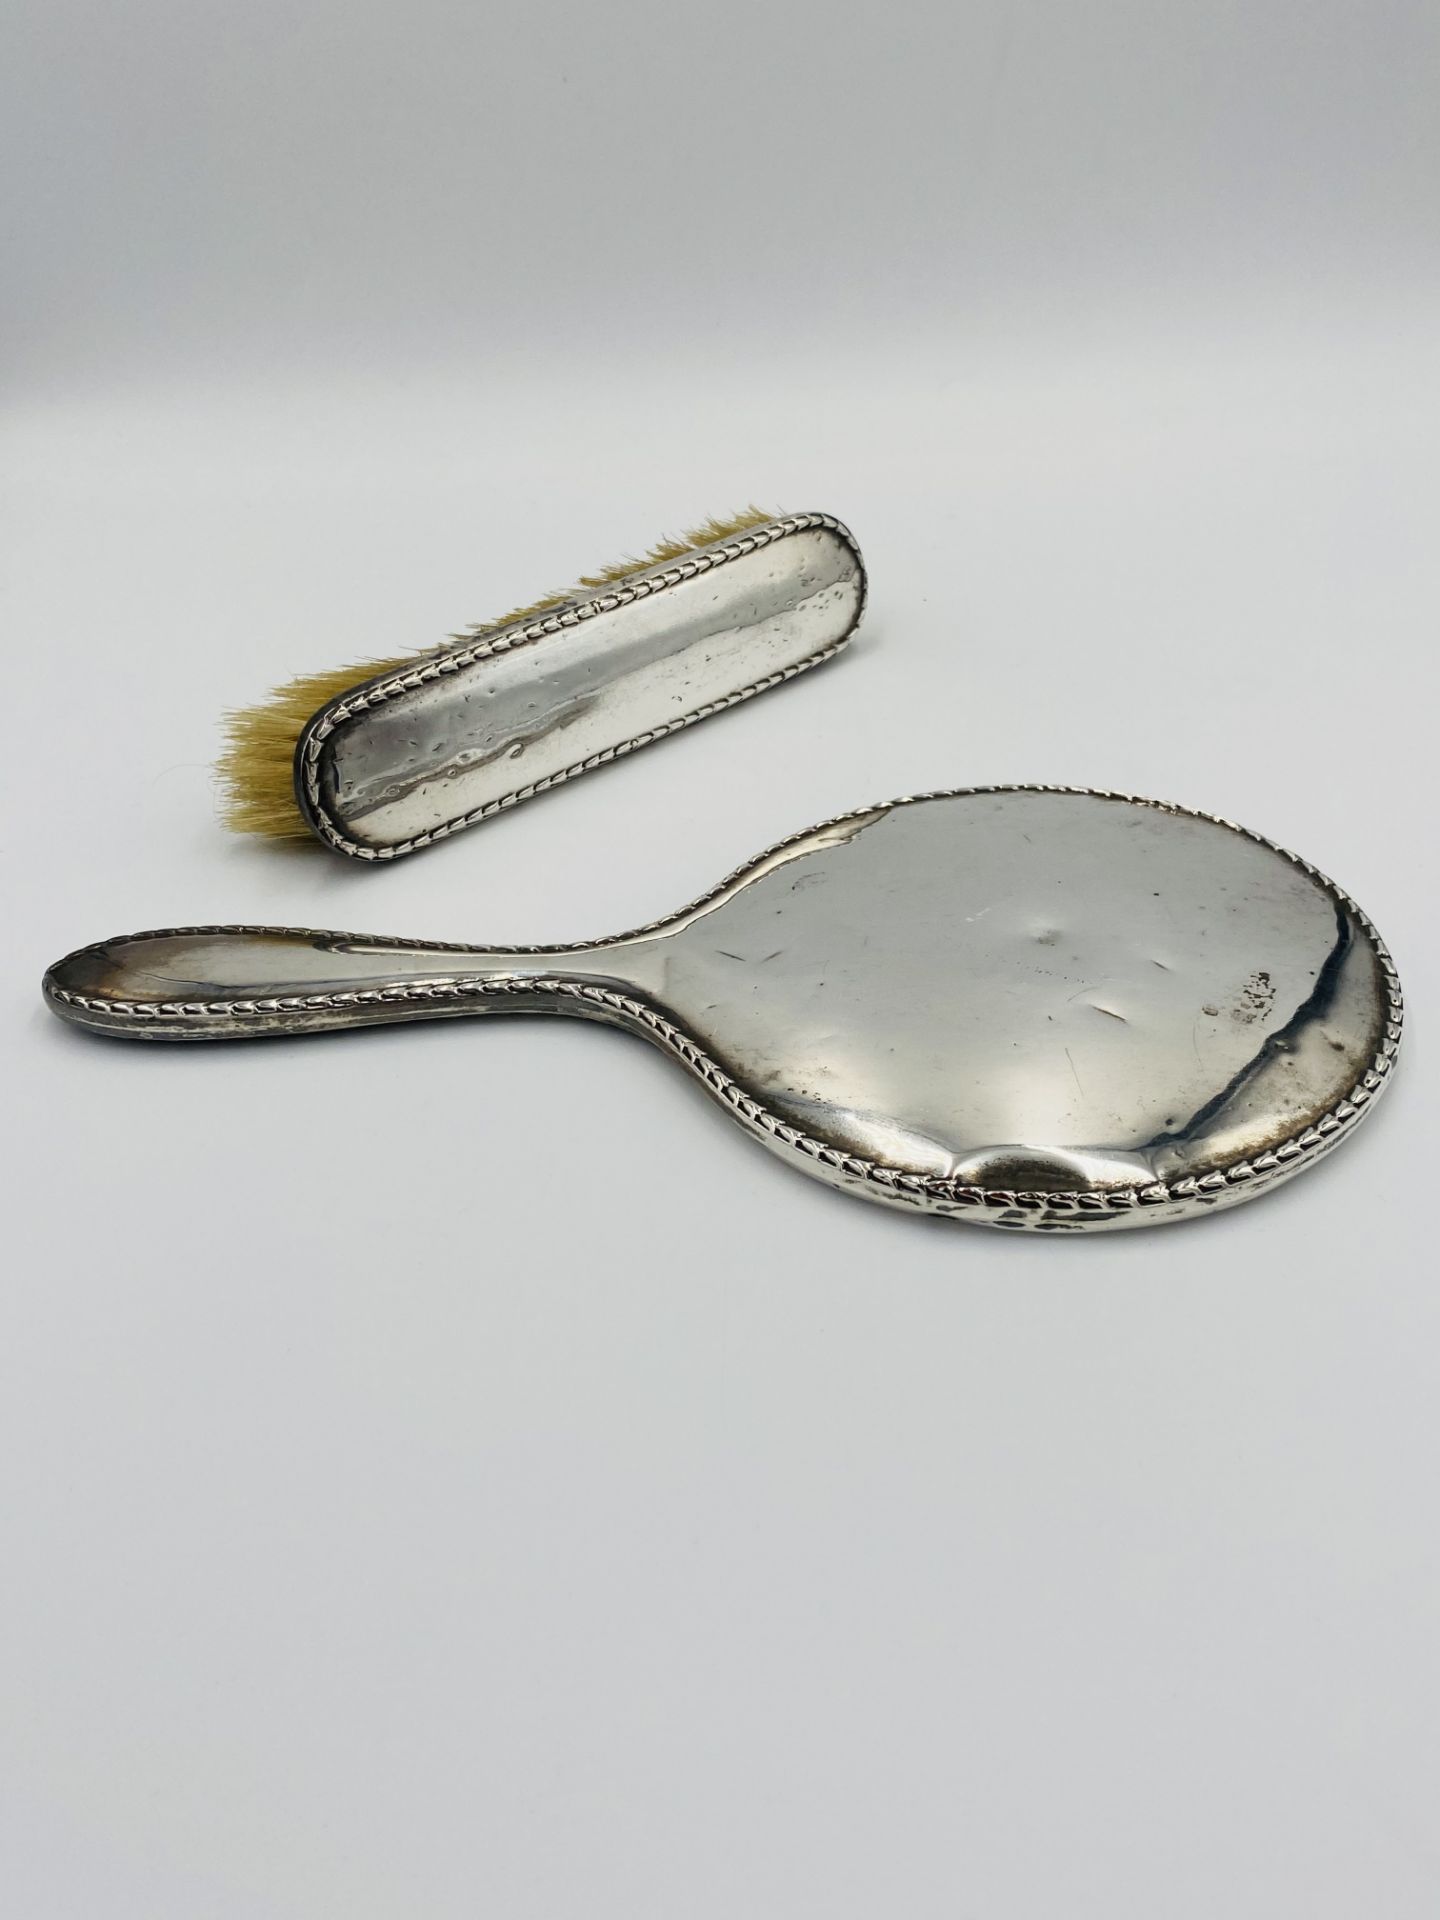 Silver backed dressing table mirror and brush - Image 5 of 6